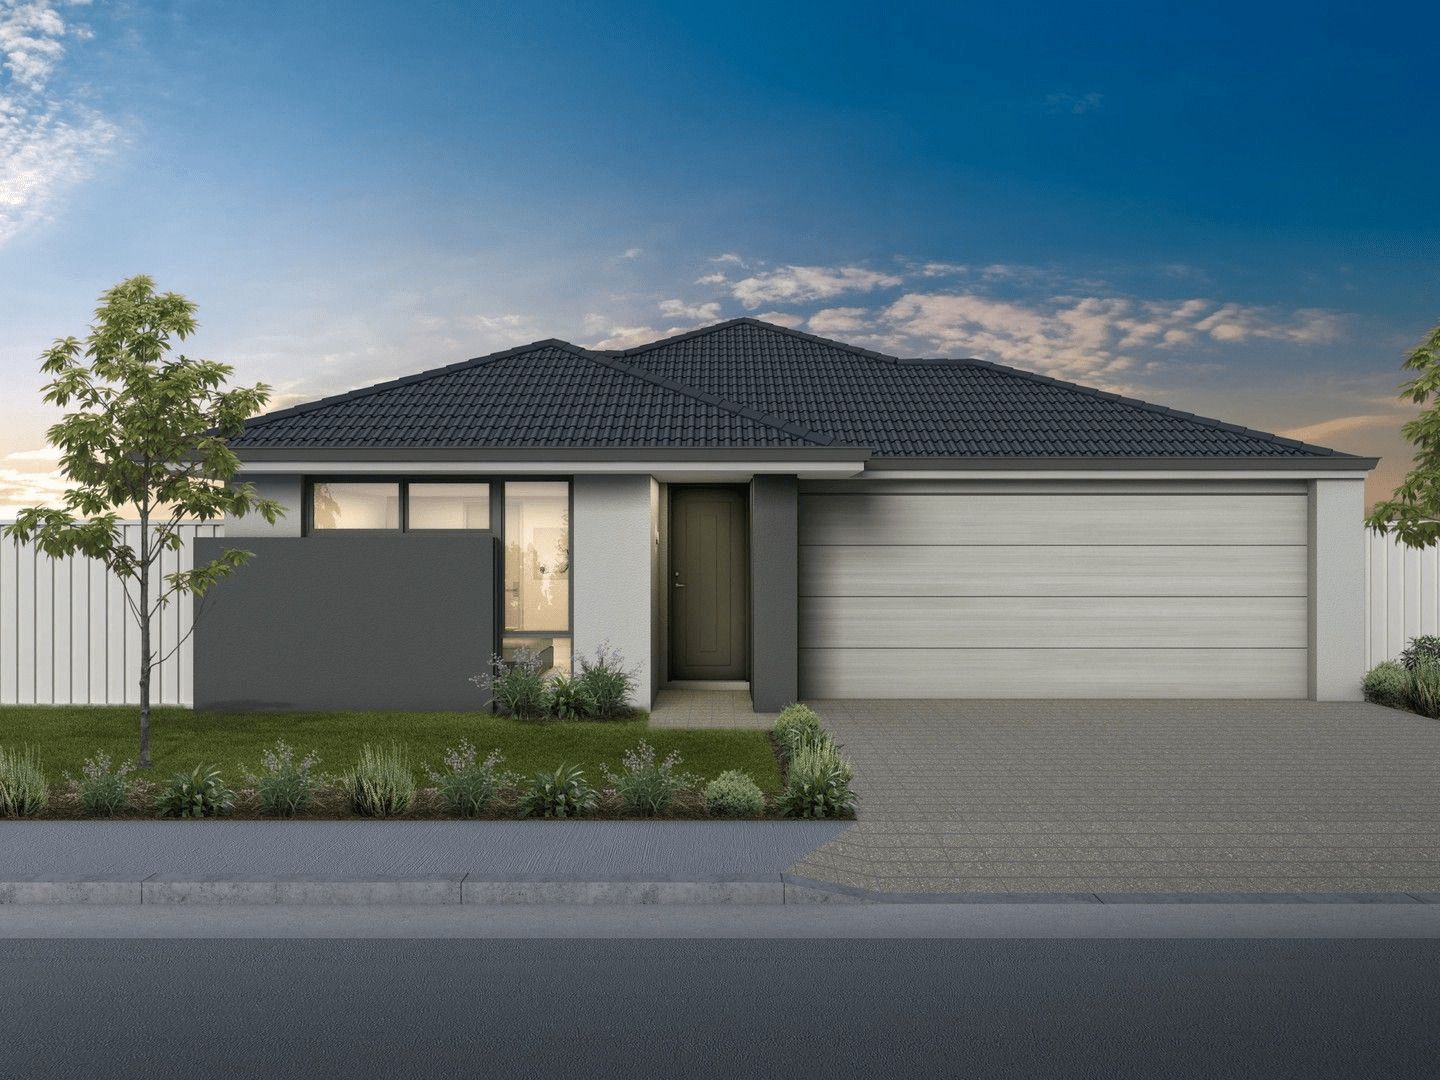 4 bedrooms New House & Land in  RUTHERFORD NSW, 2320